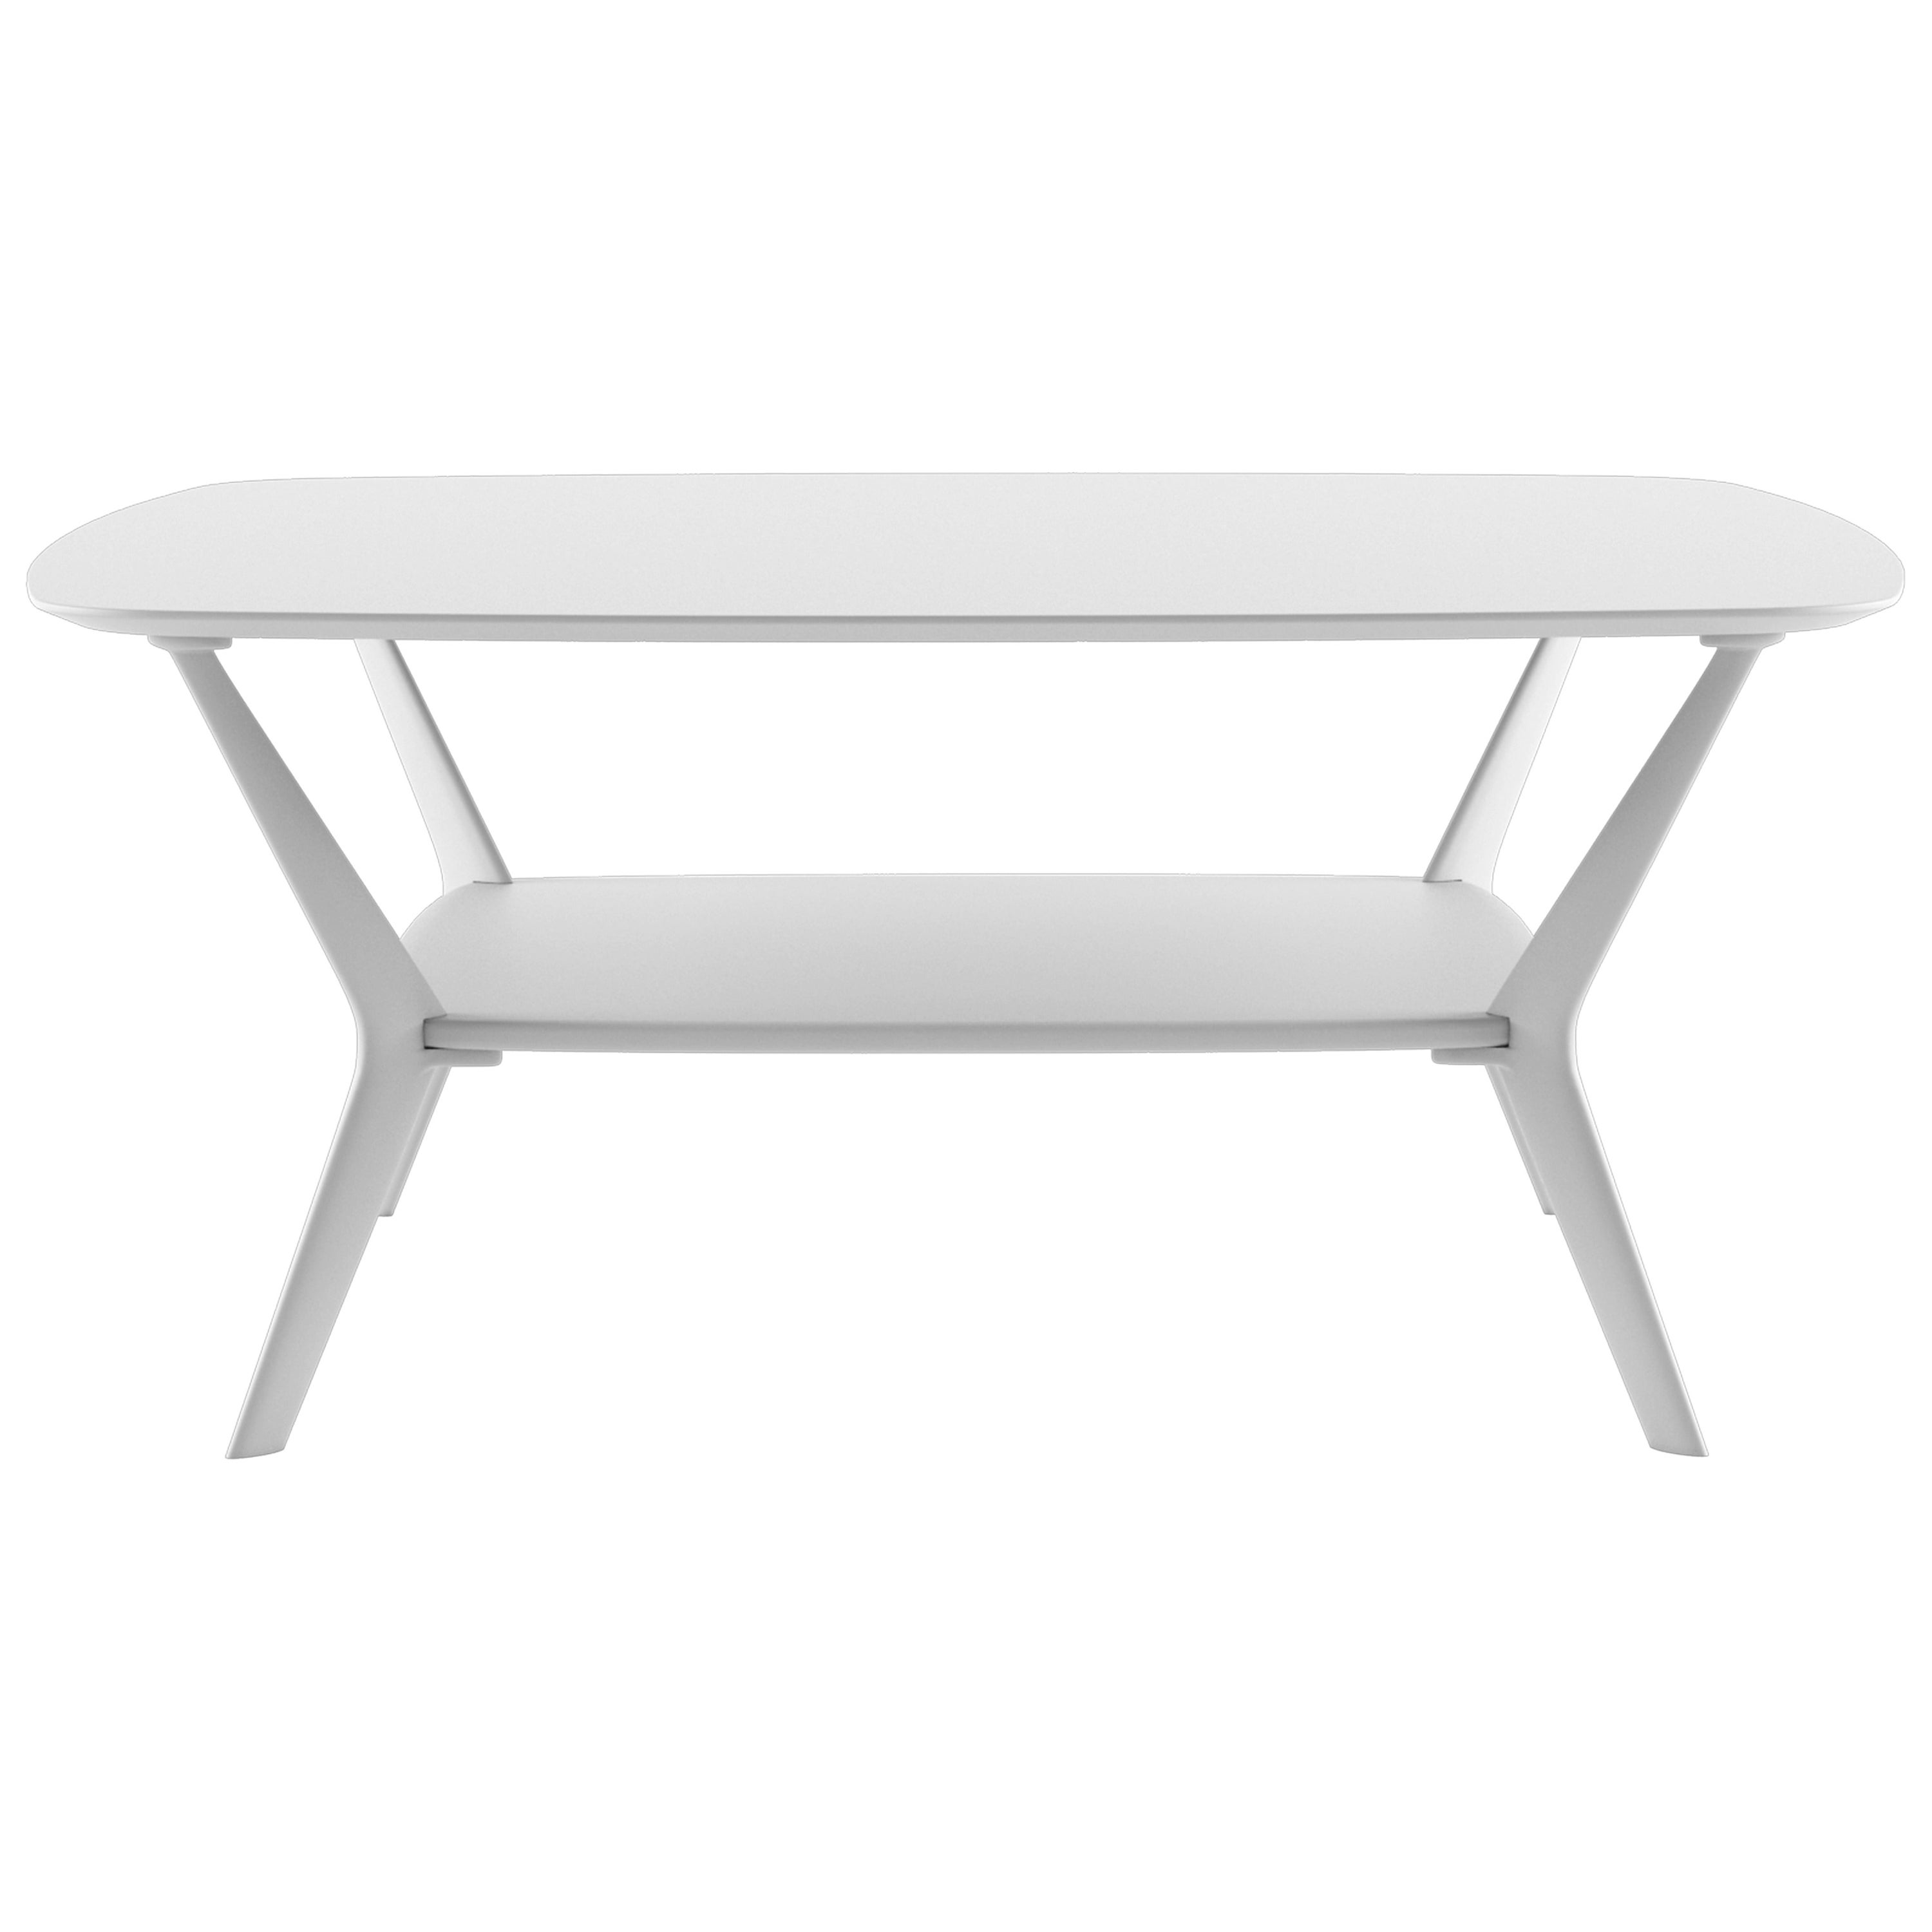 Alias B05 Biplane XS 80X80 Outdoor Table in White Top and Lacquered Frame For Sale